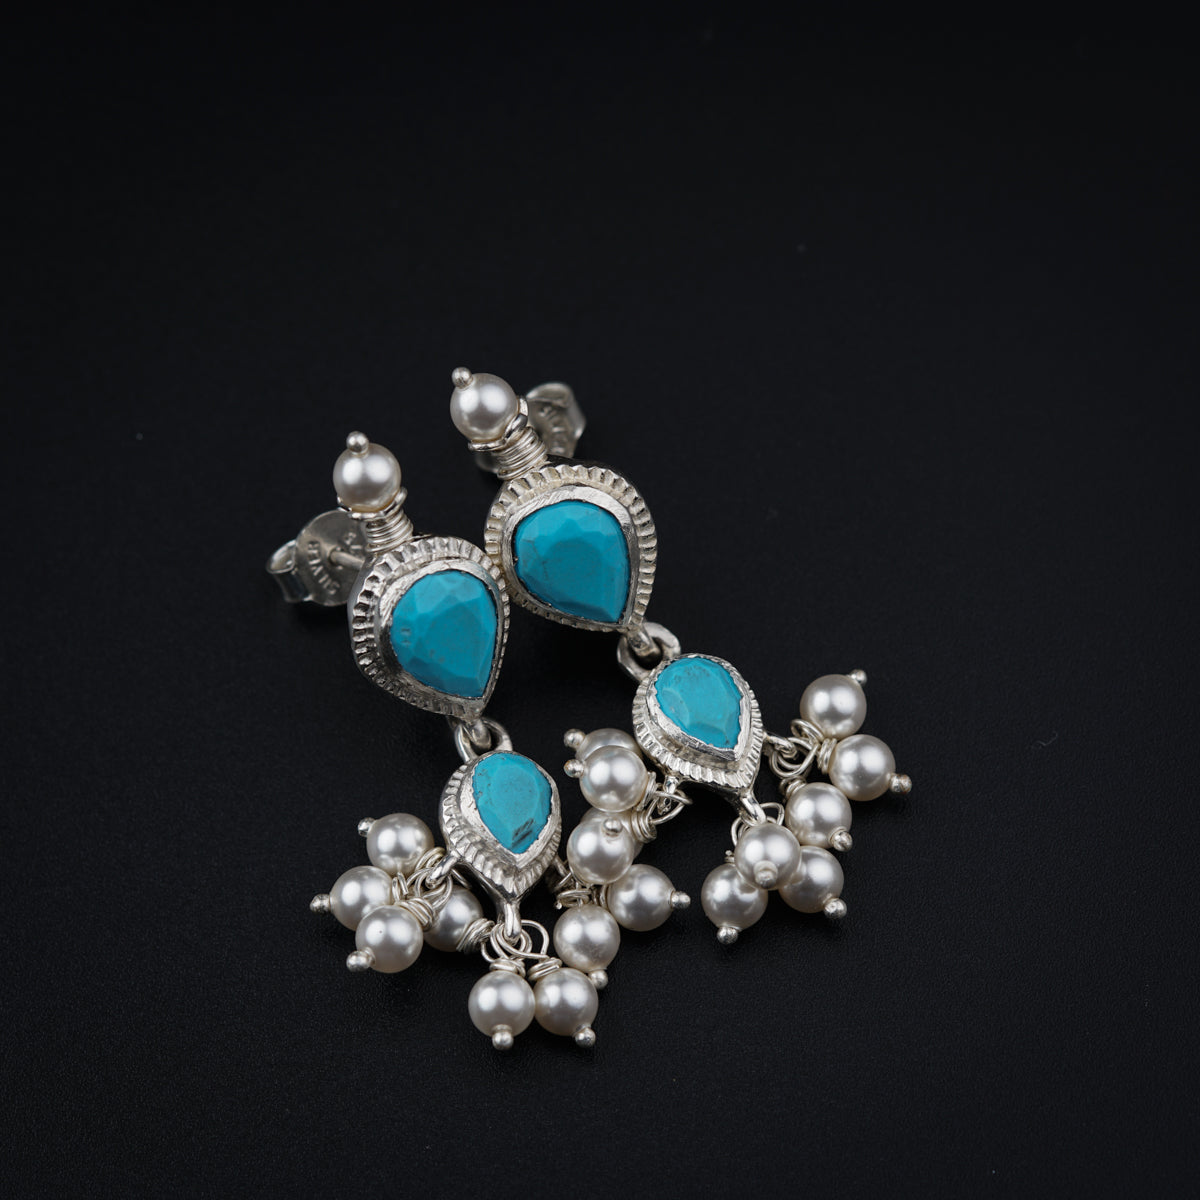 a pair of earrings with turquoise stones and pearls